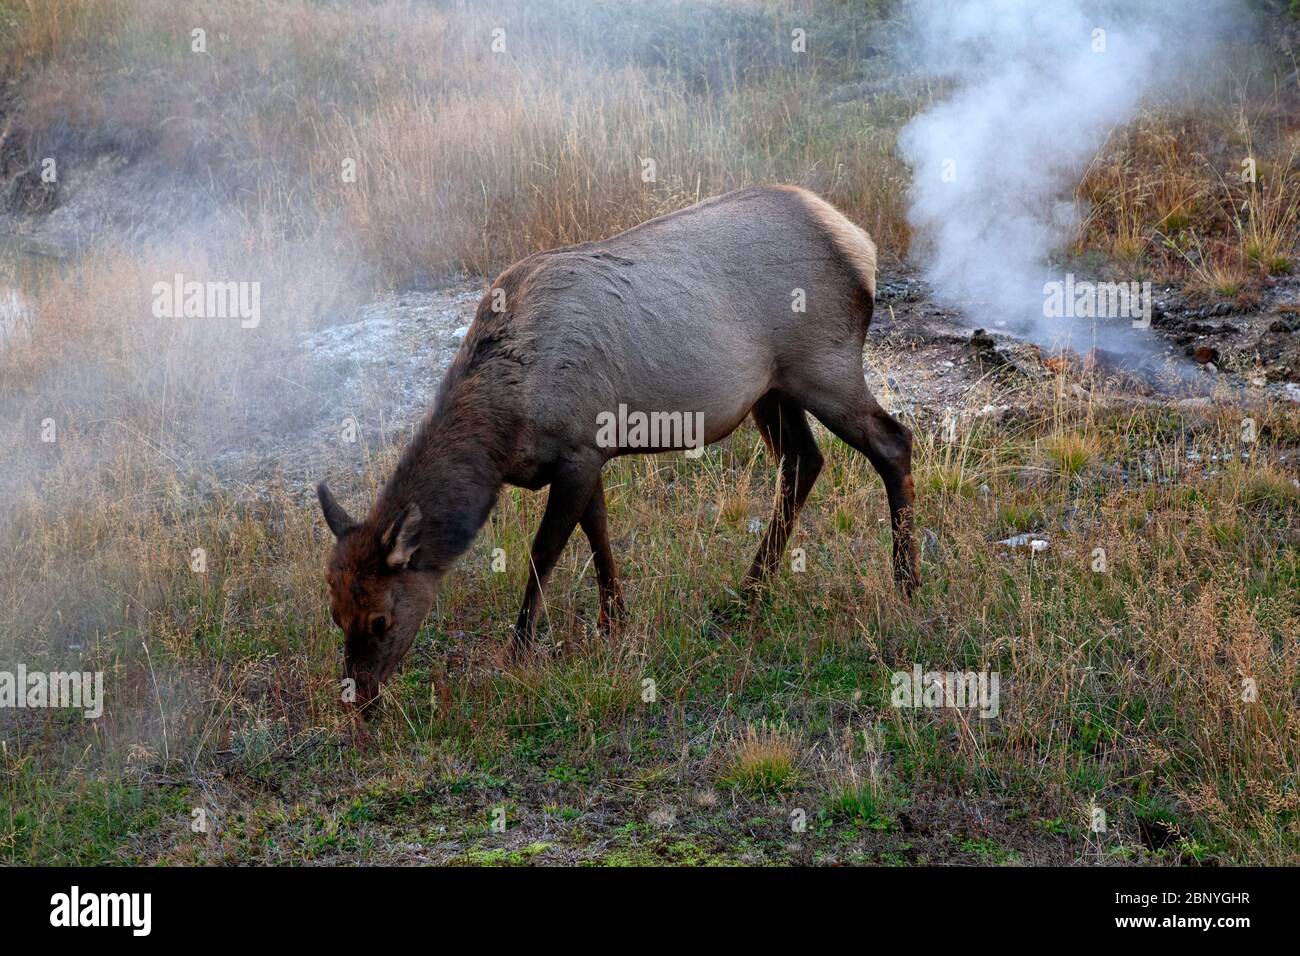 WY04379-00...WYOMING - A elk grazing among the hot springs at the West Thumb Thermal area in Yellowstone National Park. Stock Photo